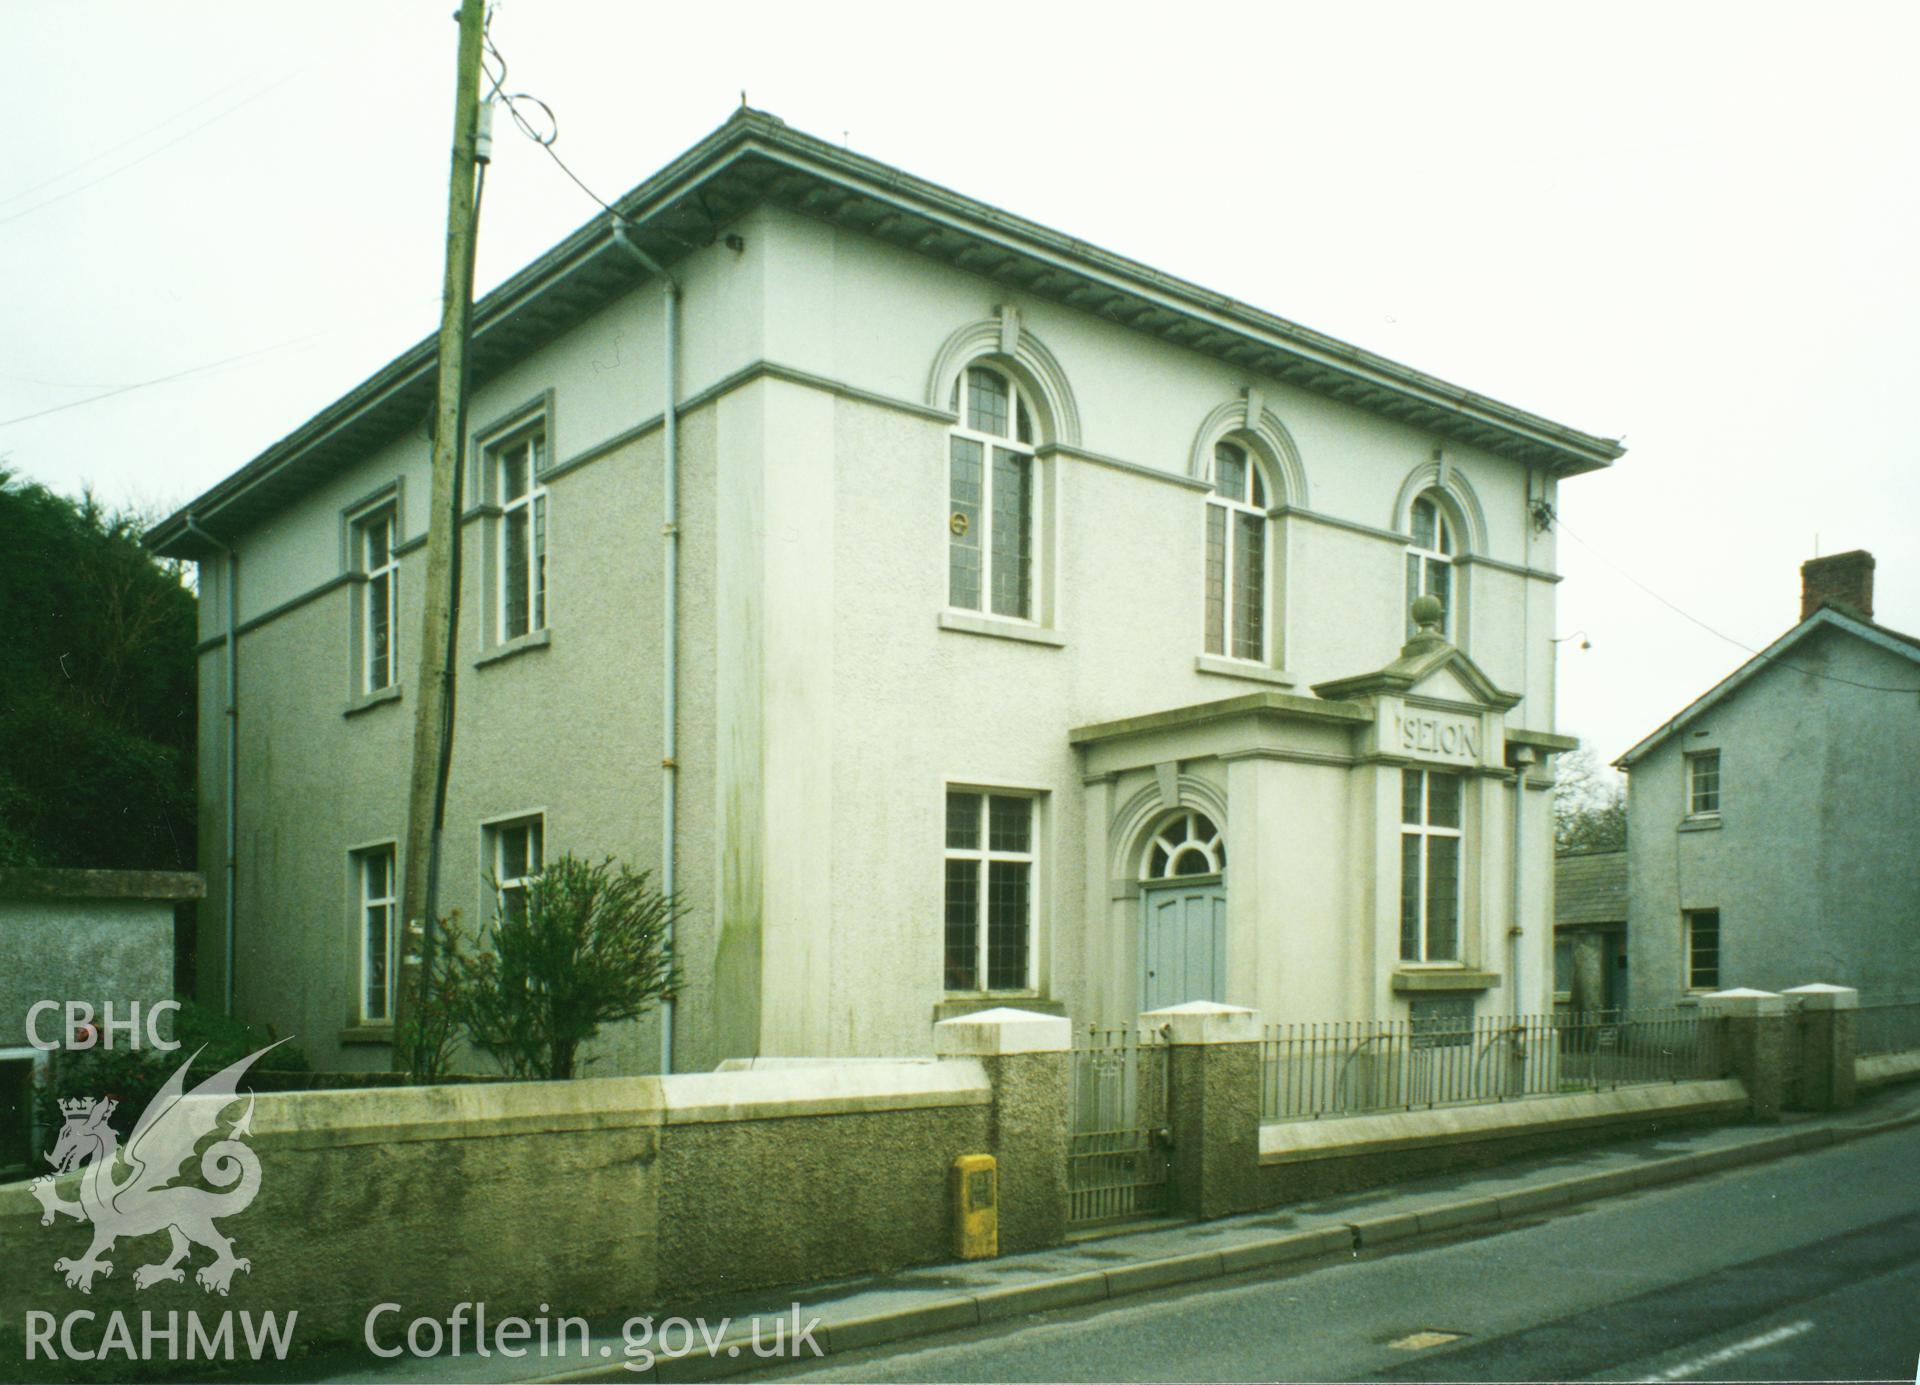 Digital copy of a colour photograph showing an exterior view of Seion Welsh Baptist Chapel, St Clears, taken by Robert Scourfield, 1996.